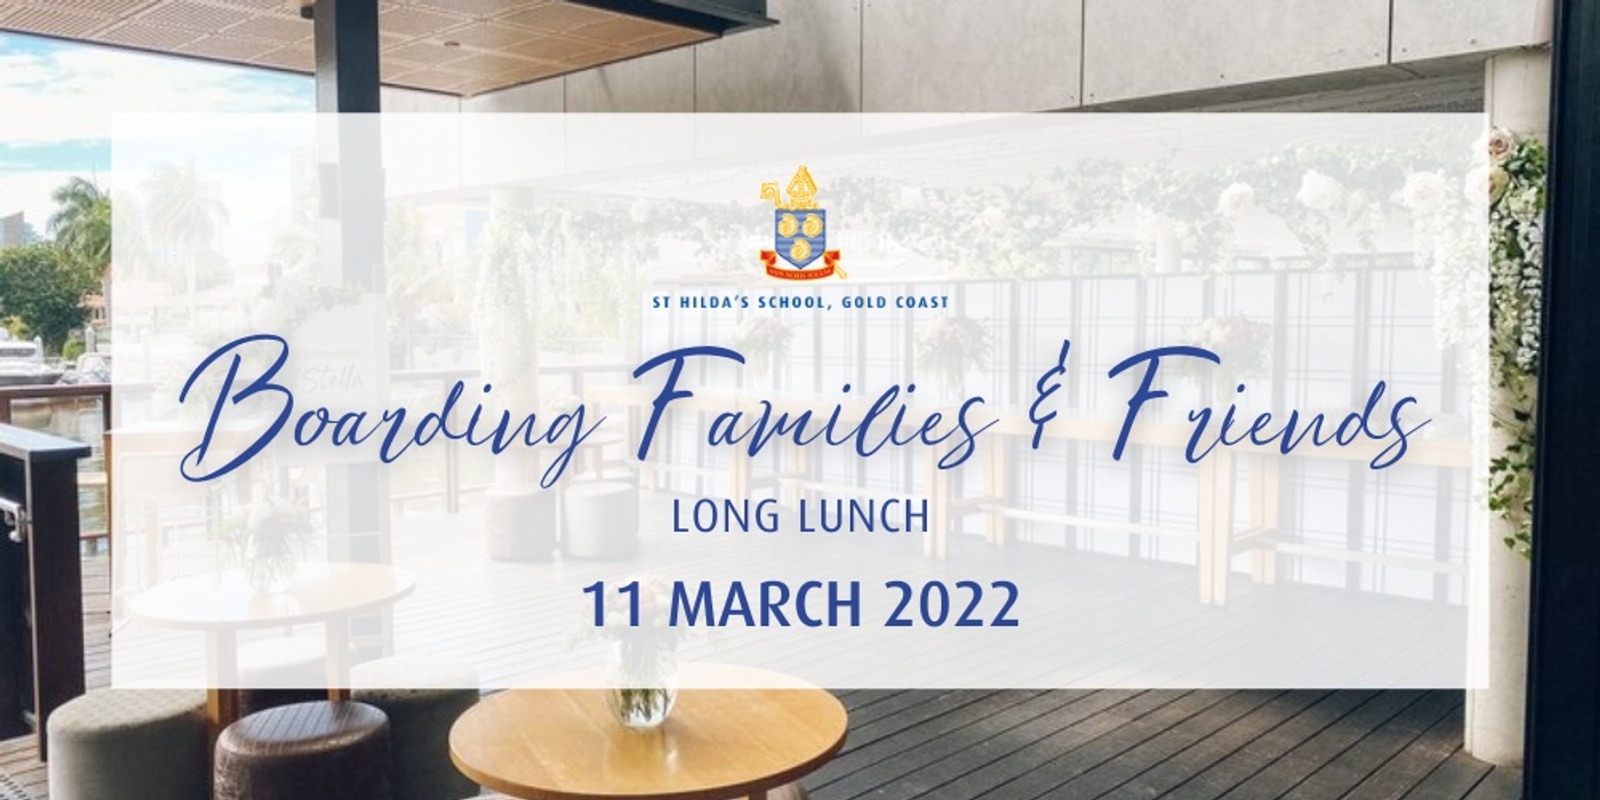 Banner image for St Hilda's School Boarding Families and Friends Long Lunch 